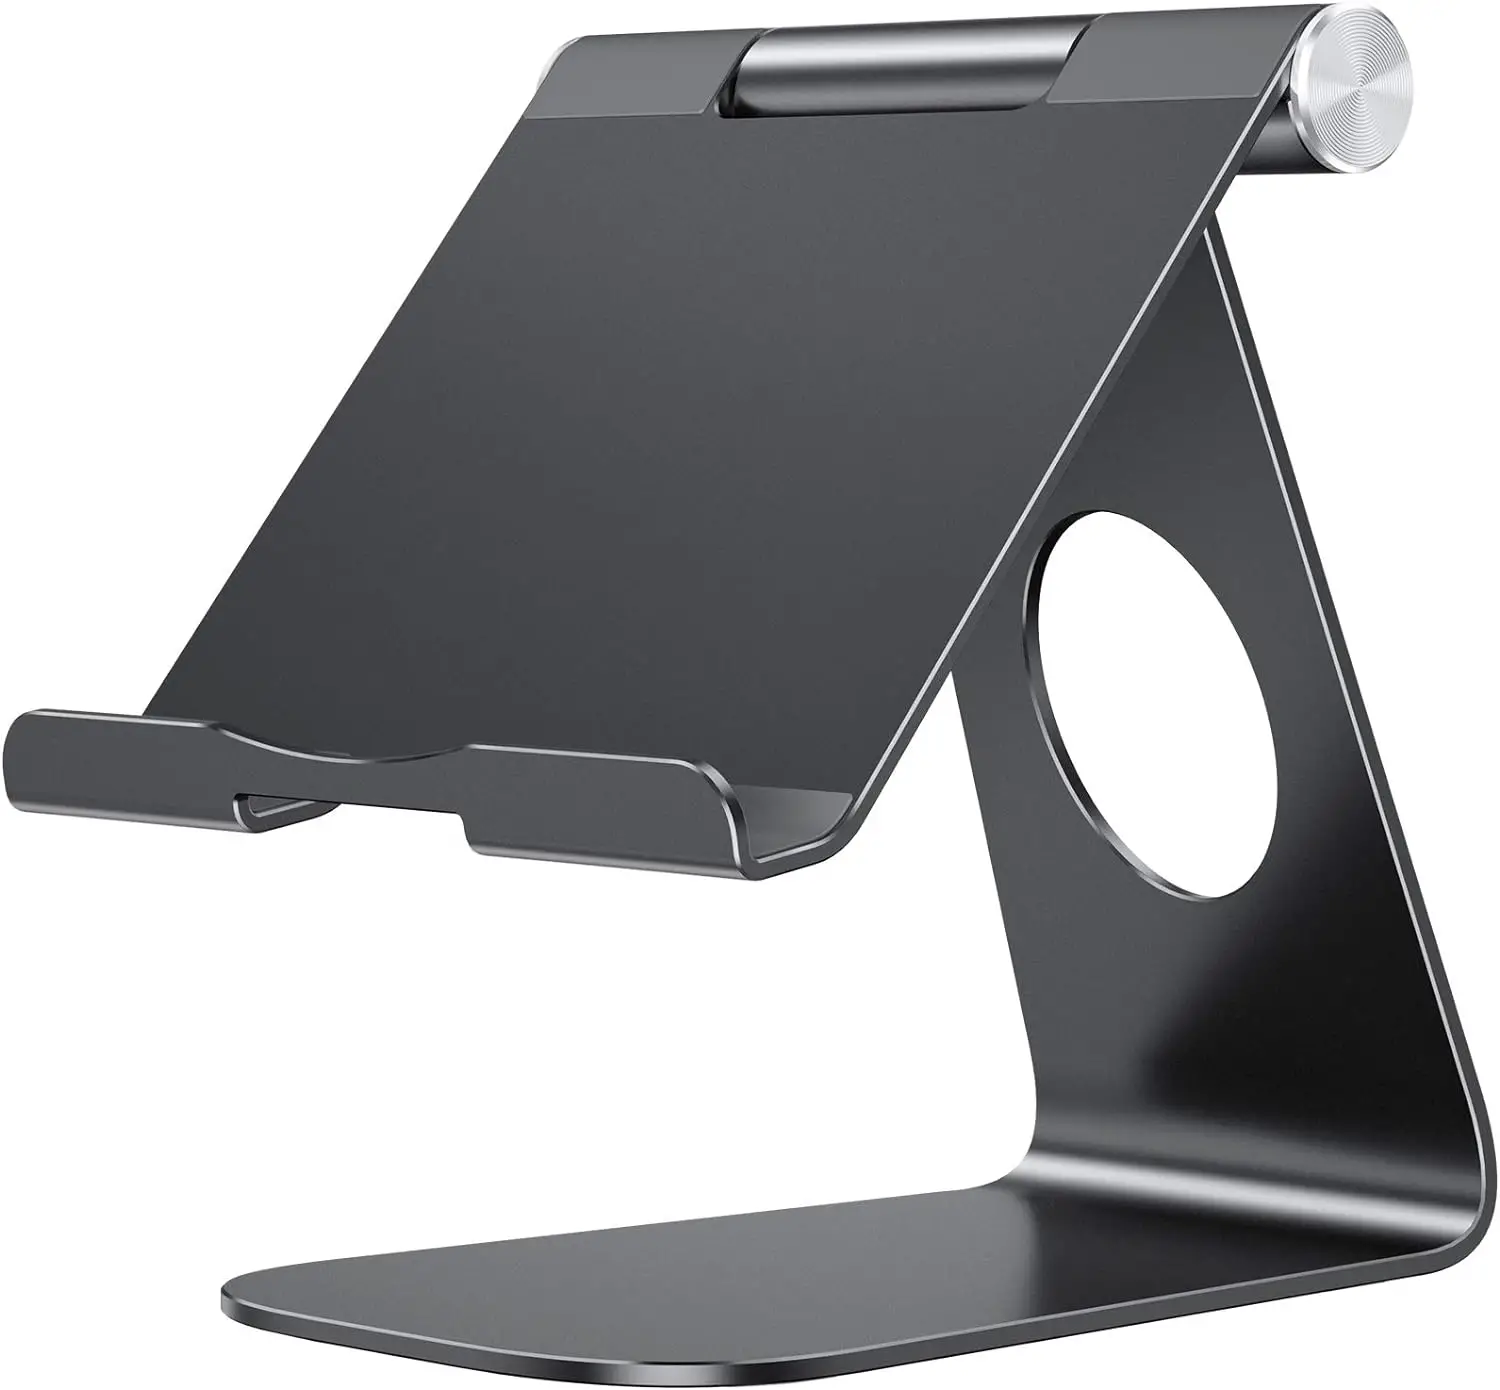 OMOTON Tablet Stand Holder Adjustable, T1 Desktop Aluminum Tablet Dock Cradle Compatible with iPad Air/Mini, iPad 10.2/9.7, iPad Pro 11/12.9, Samsung Tab and More, Rose Gold